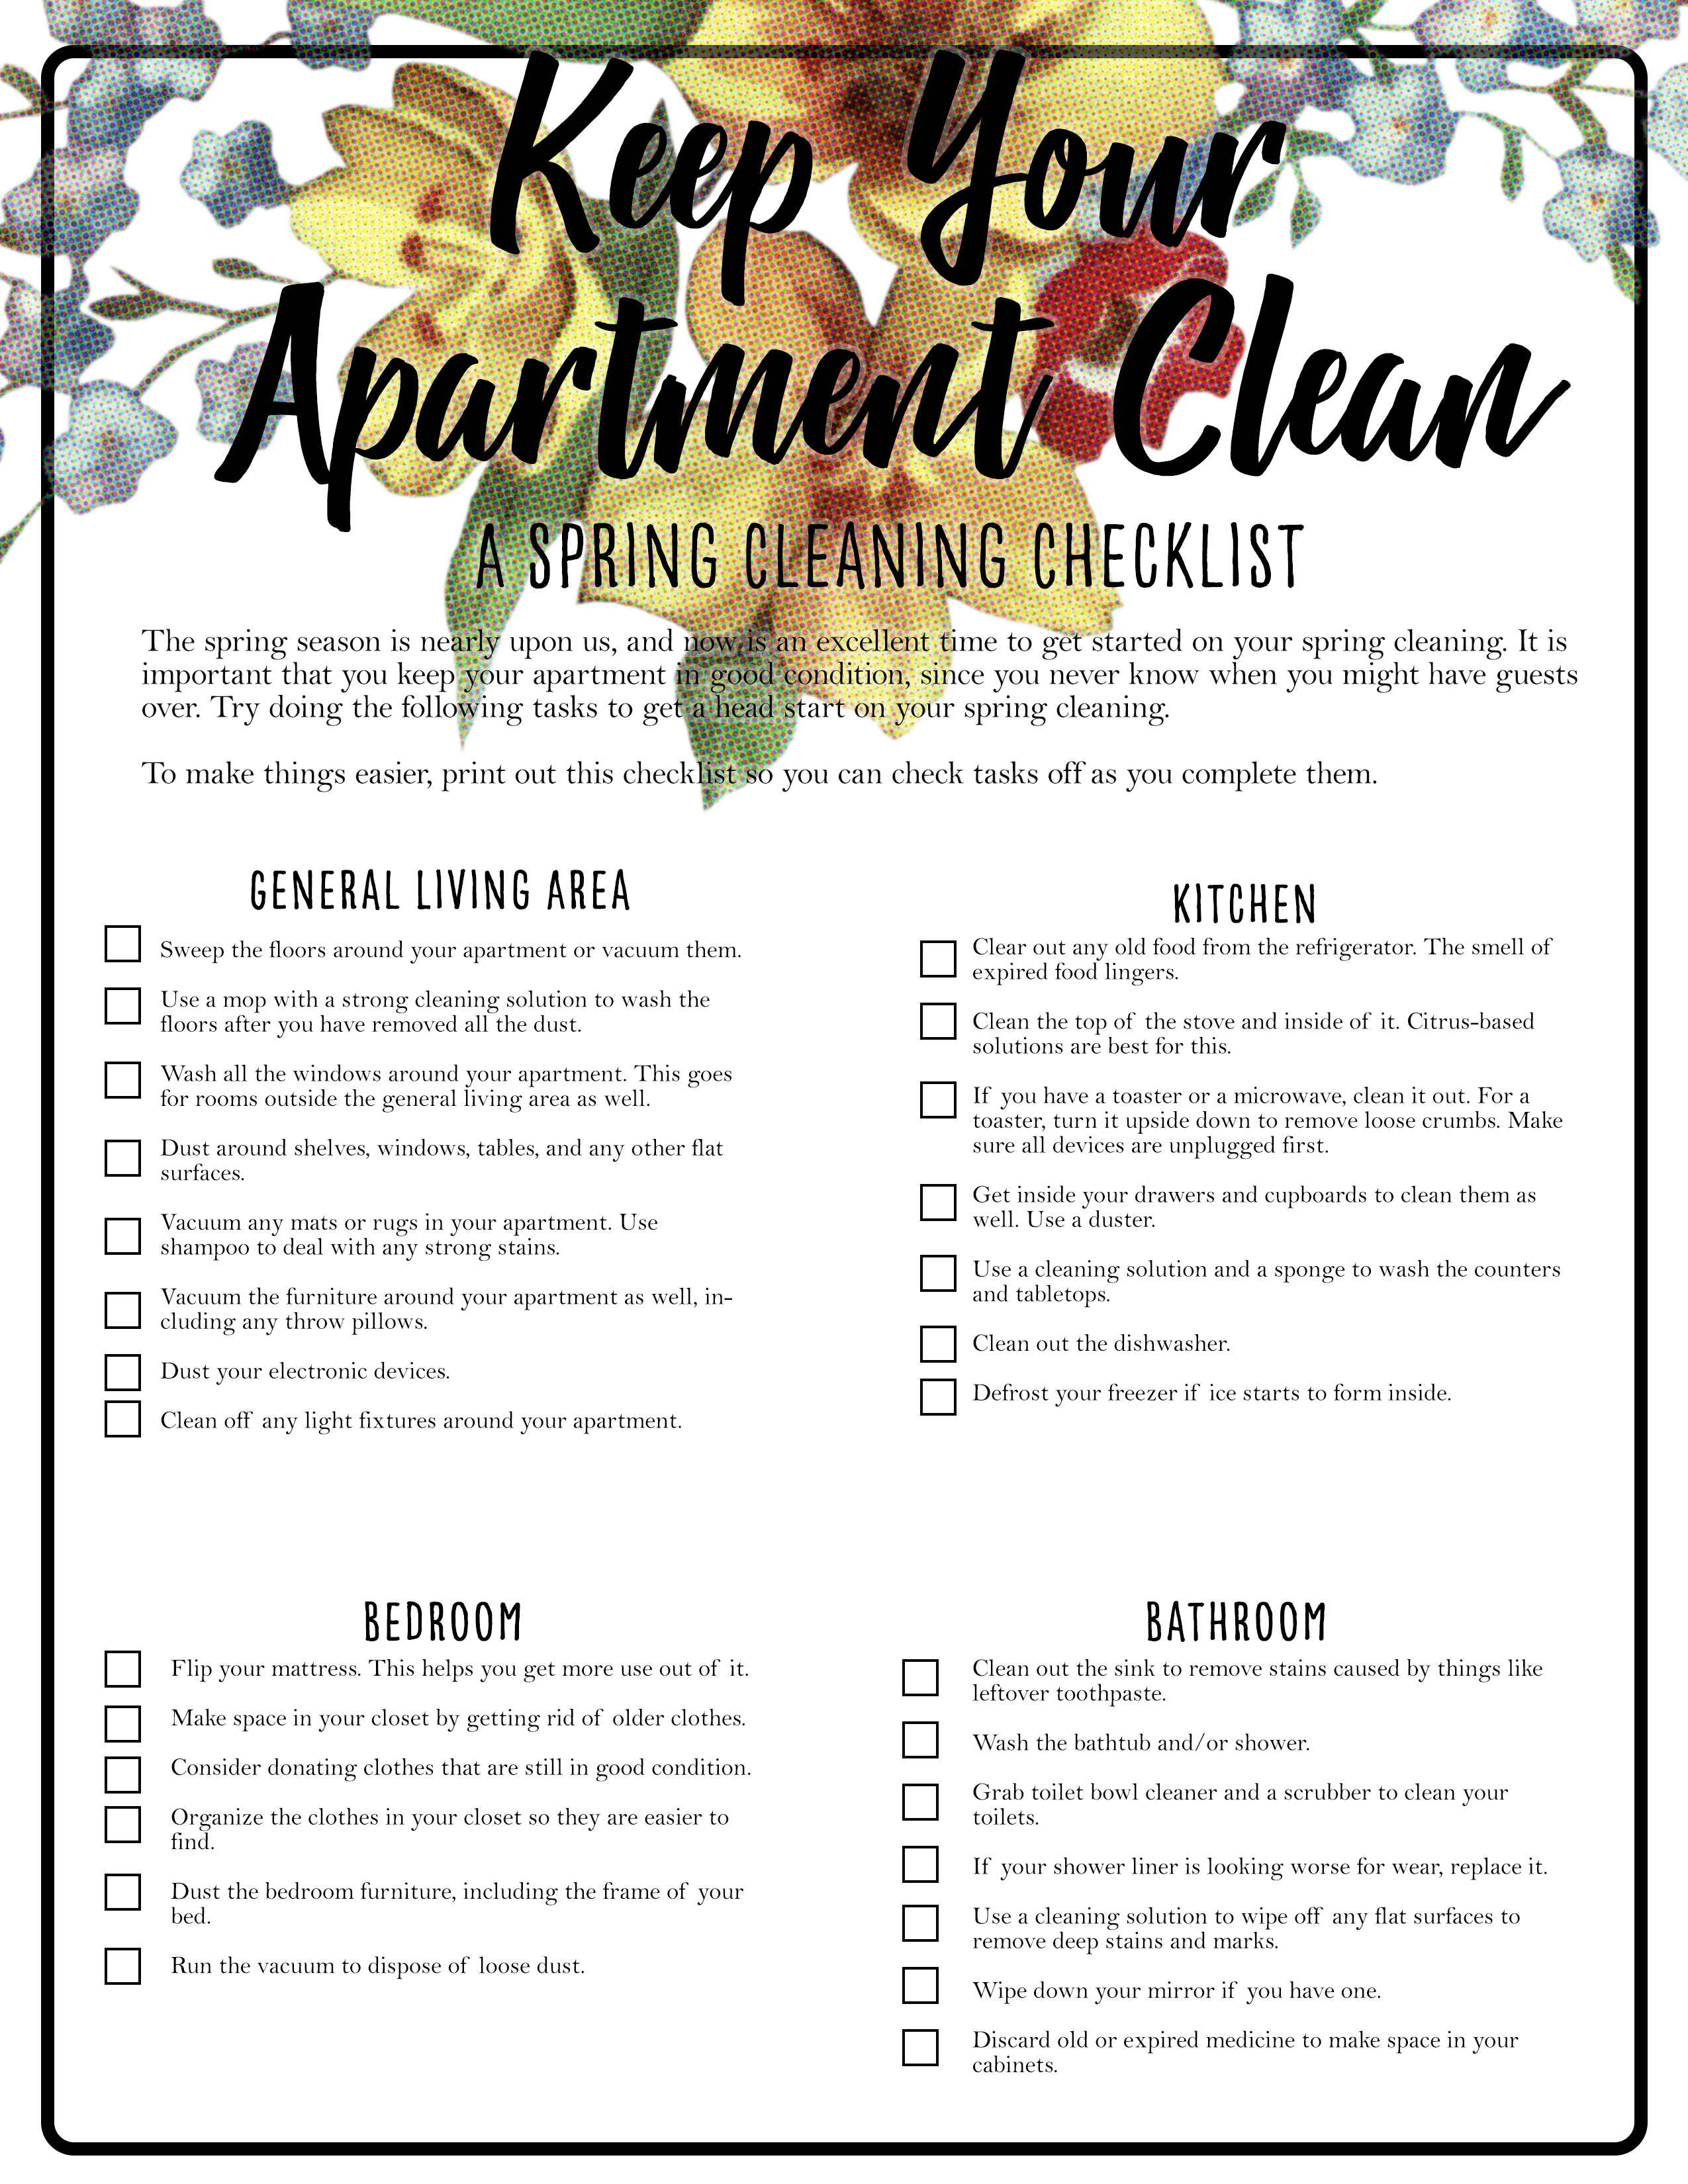 infographic-keep-your-apartment-clean-a-spring-cleaning-checklis